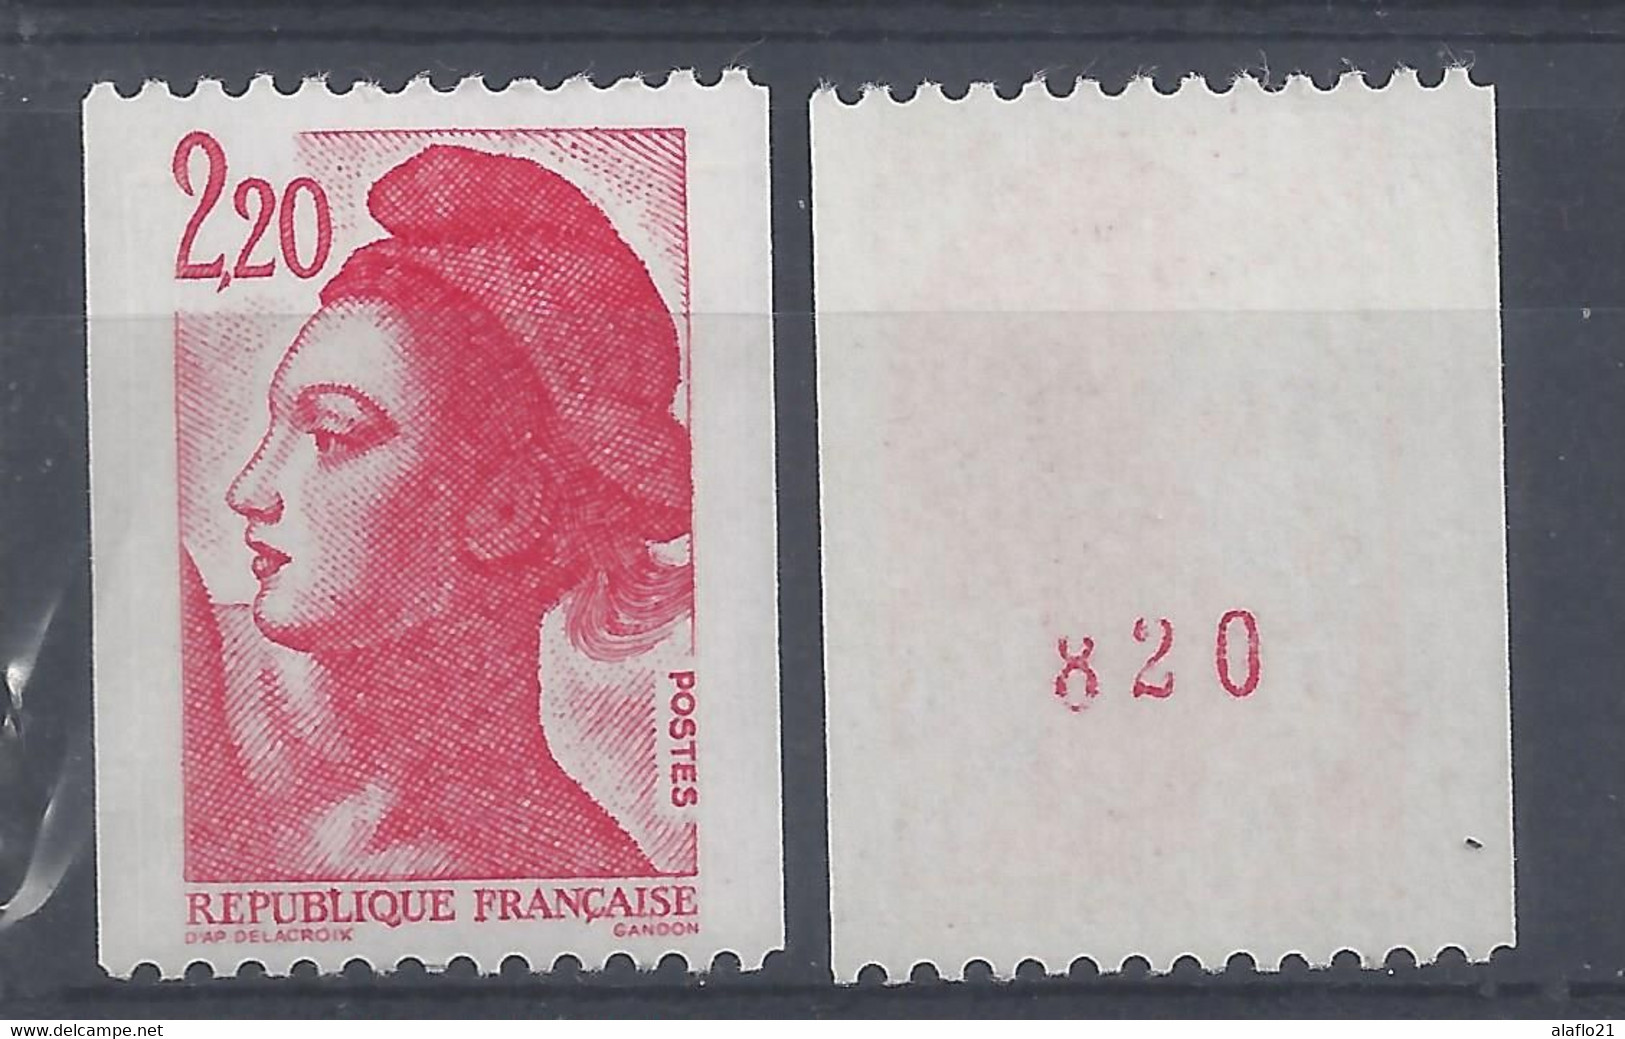 LIBERTE - ROULETTE Avec N° ROUGE N° 2379a - NEUF SANS CHARNIERE - Coil Stamps